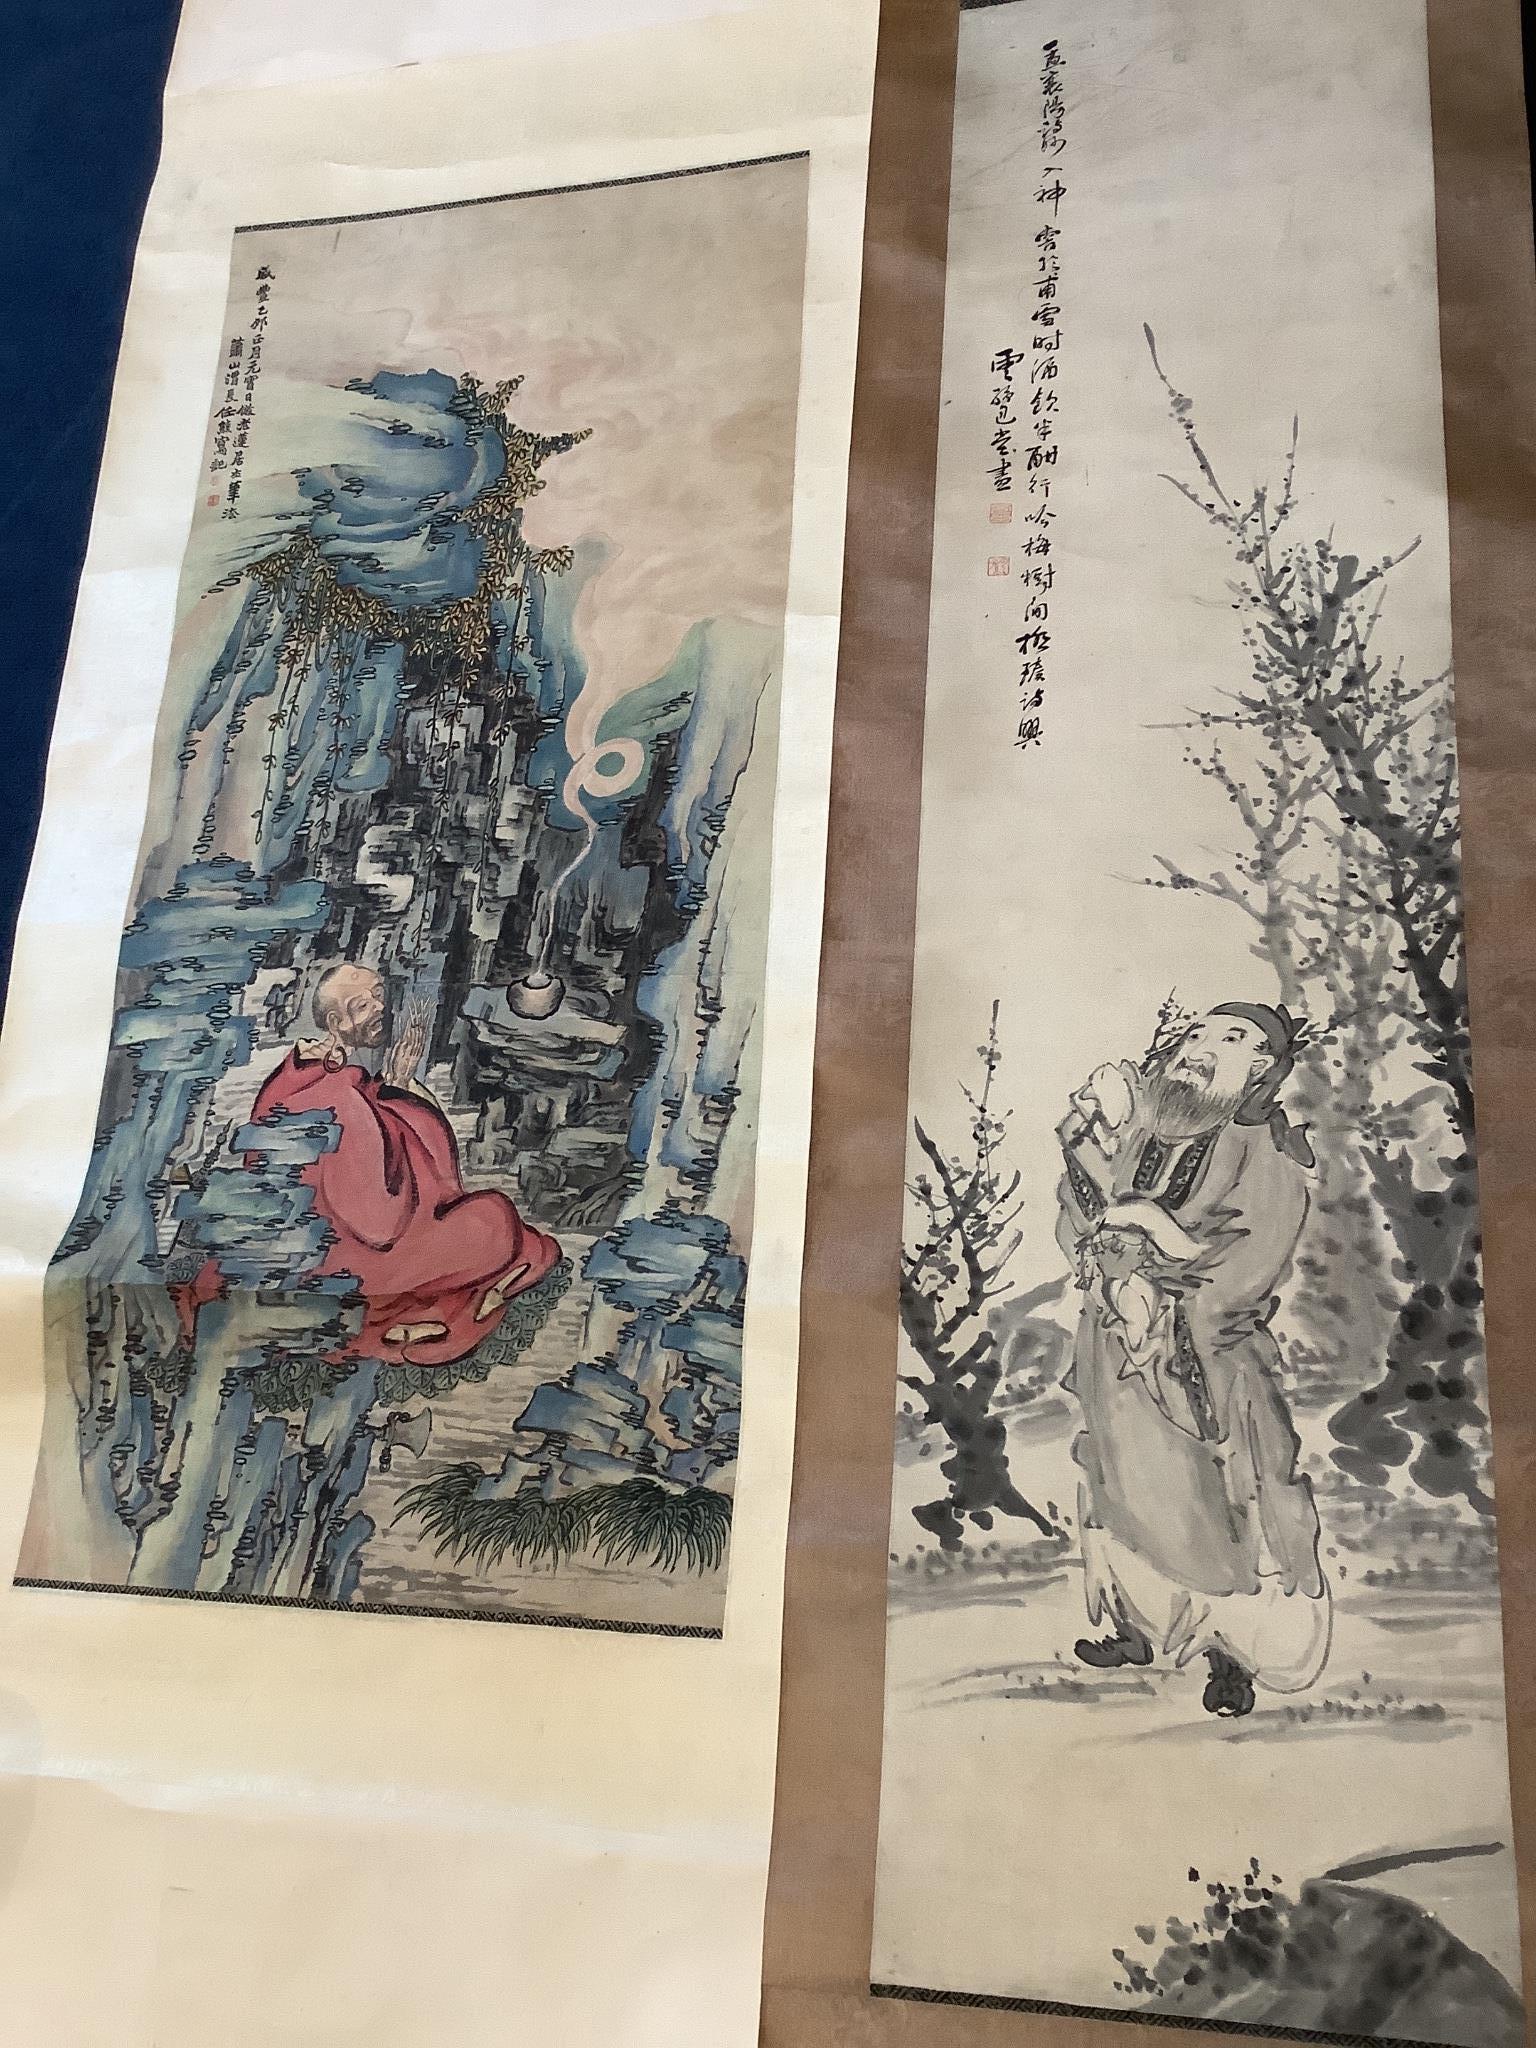 Two Chinese scroll paintings on paper, 20th century, depicting a Luohan in a cave and a scholar amid prunus Images 103 cm X 47 cm and 132 cm X 32.5 cm